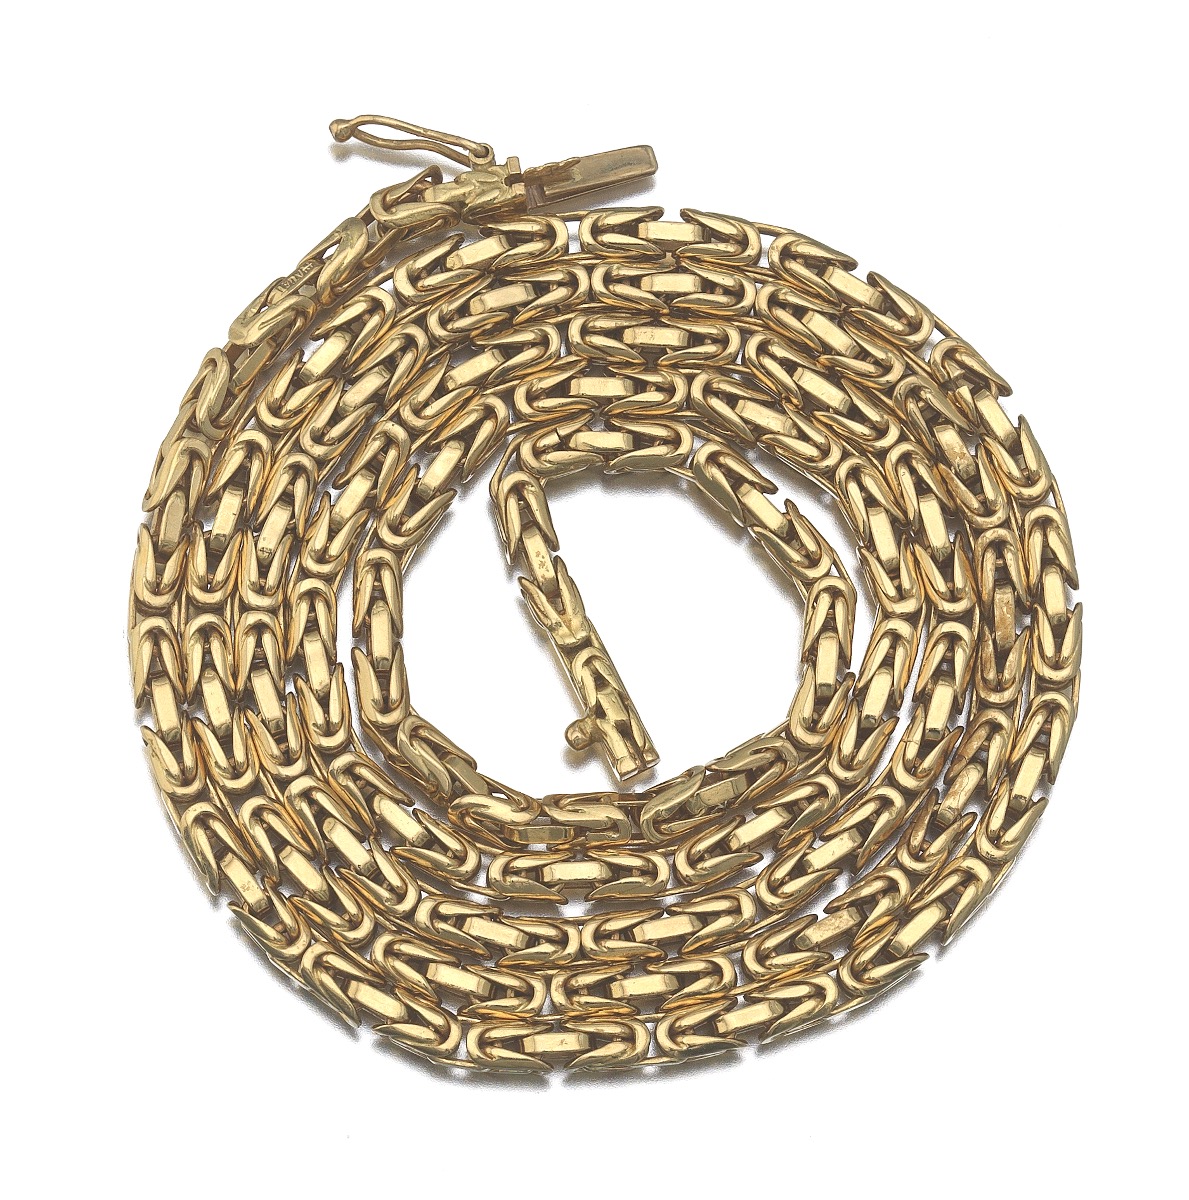 Gold Byzantine Chain Necklace Signed "Piaget" - Image 3 of 4